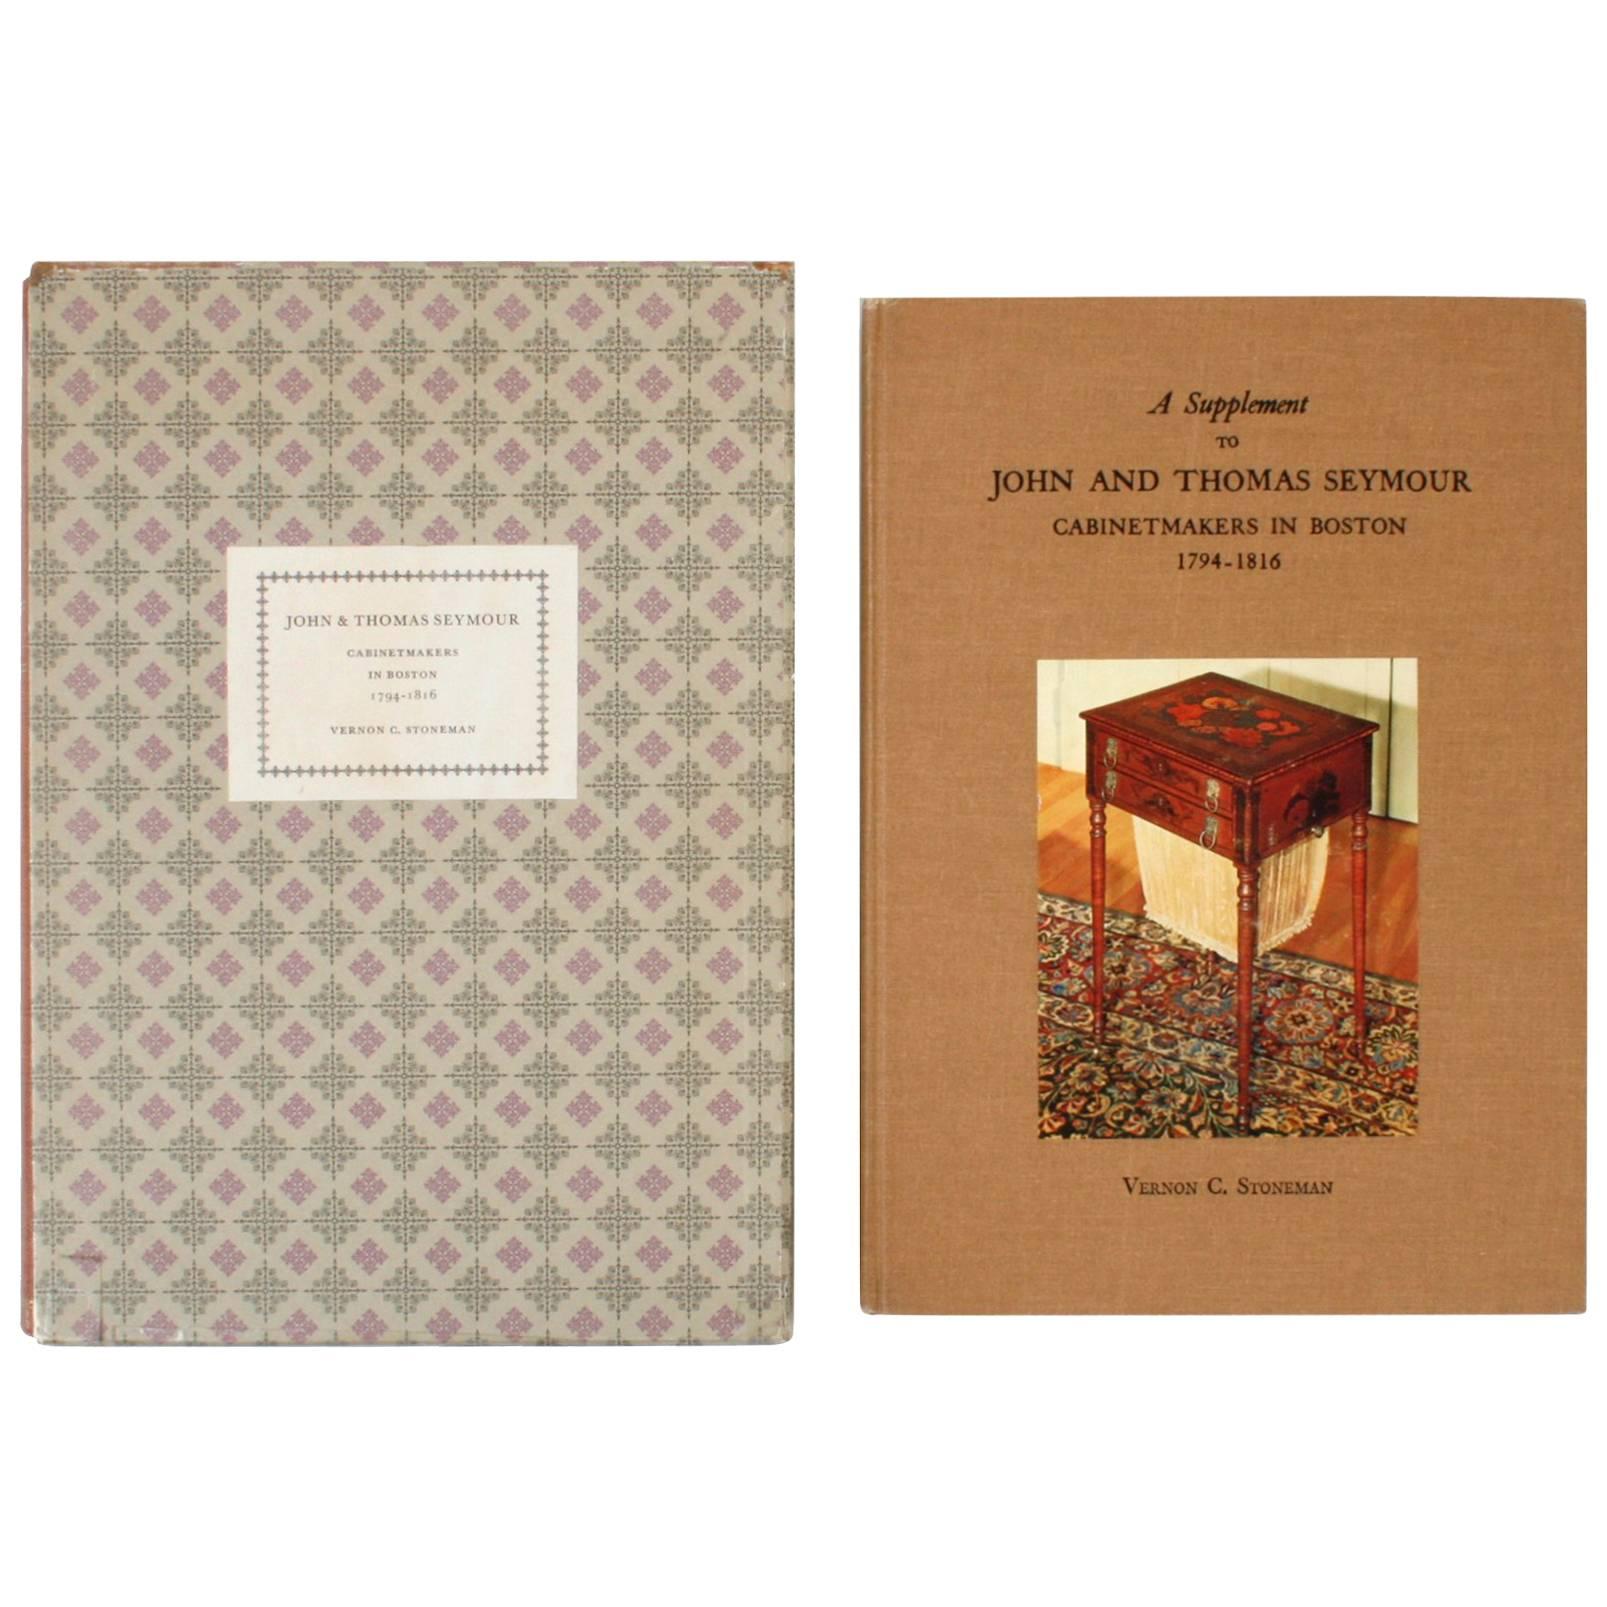 John & Thomas Seymour Cabinet Makers in Boston 1794-1816 with Supplement For Sale